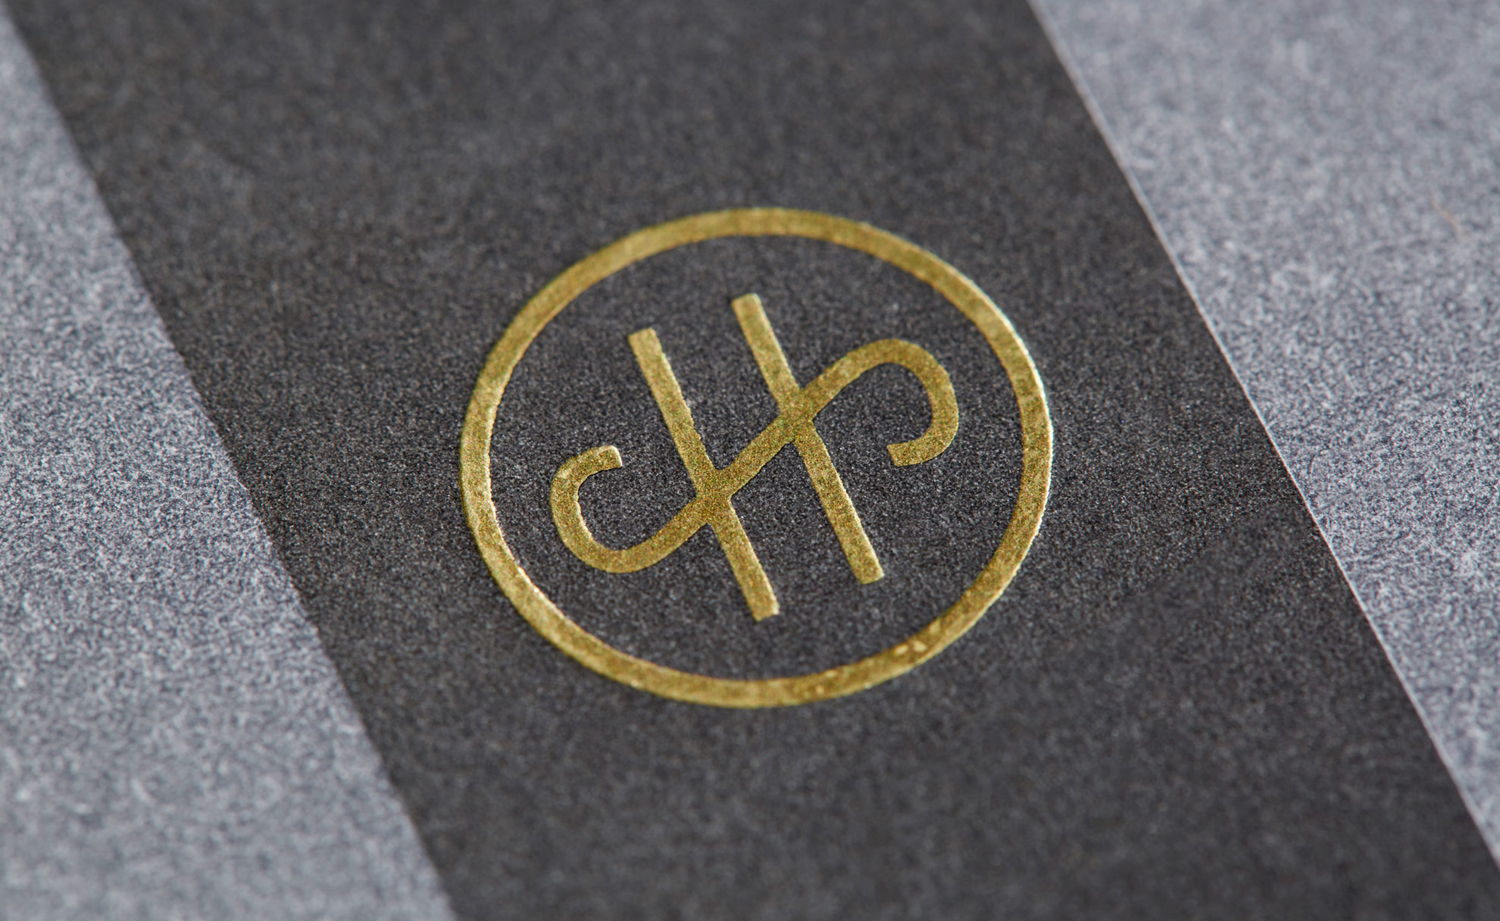 Gold foiled monogram by Conductor for High Street Wine Co, a wine bar and shop located in San Antonio's Pearl neighbourhood